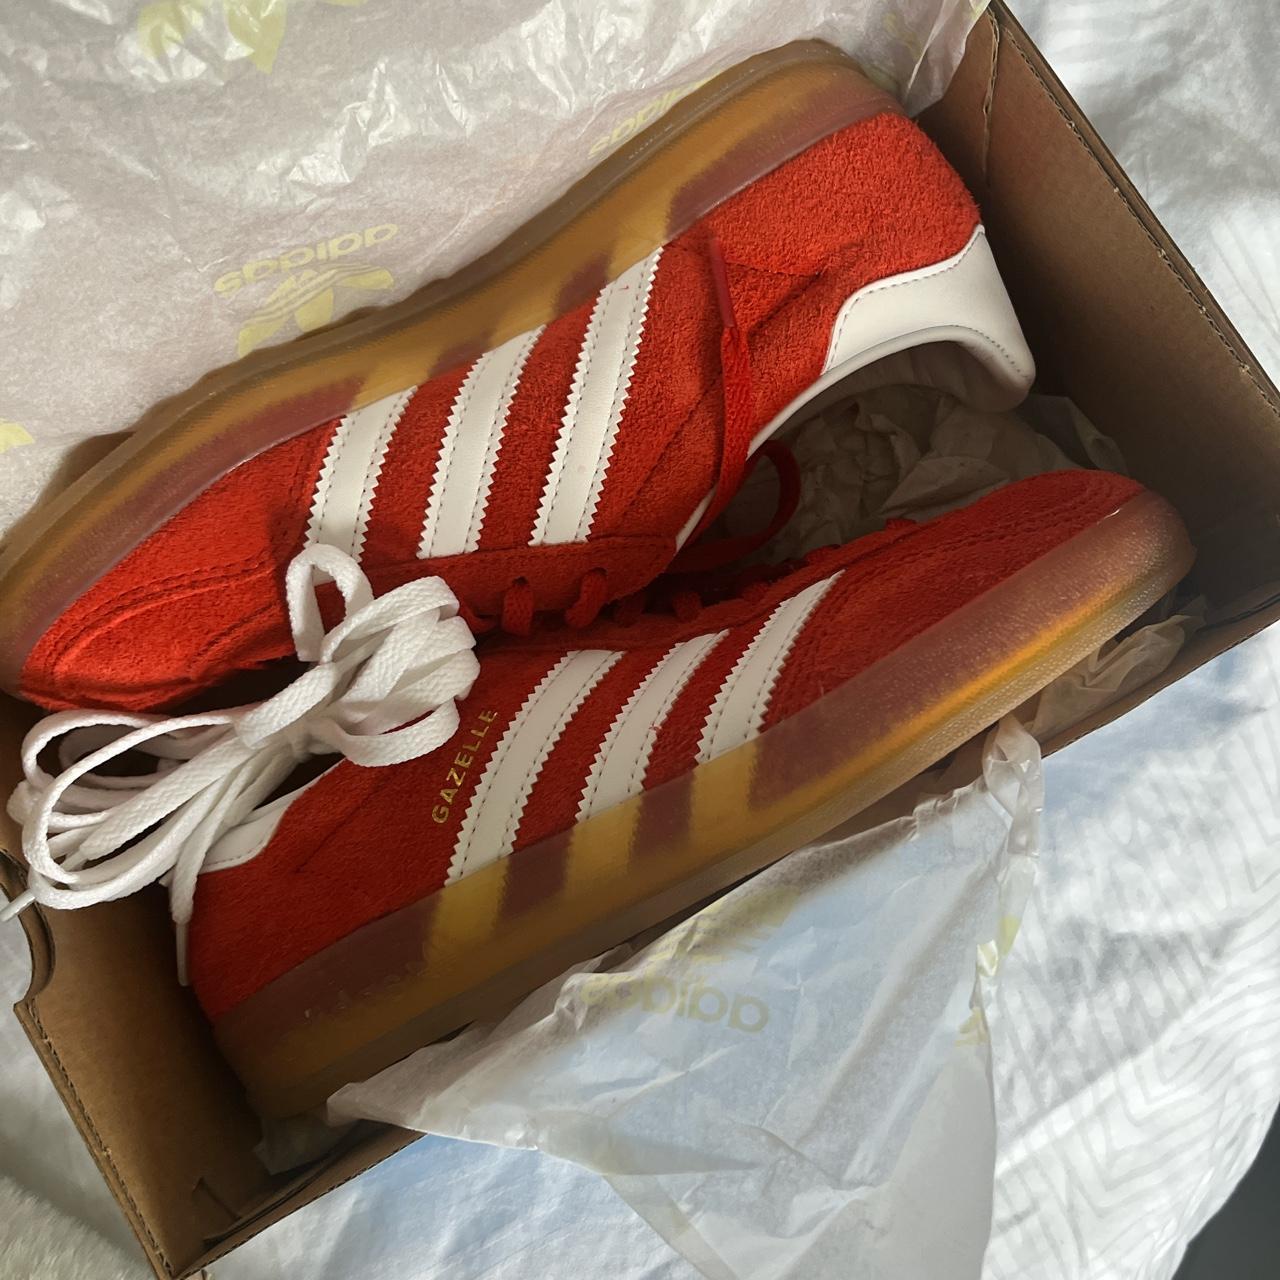 ADIDAS RED GAZELLE - brand new never worn Comes with... - Depop